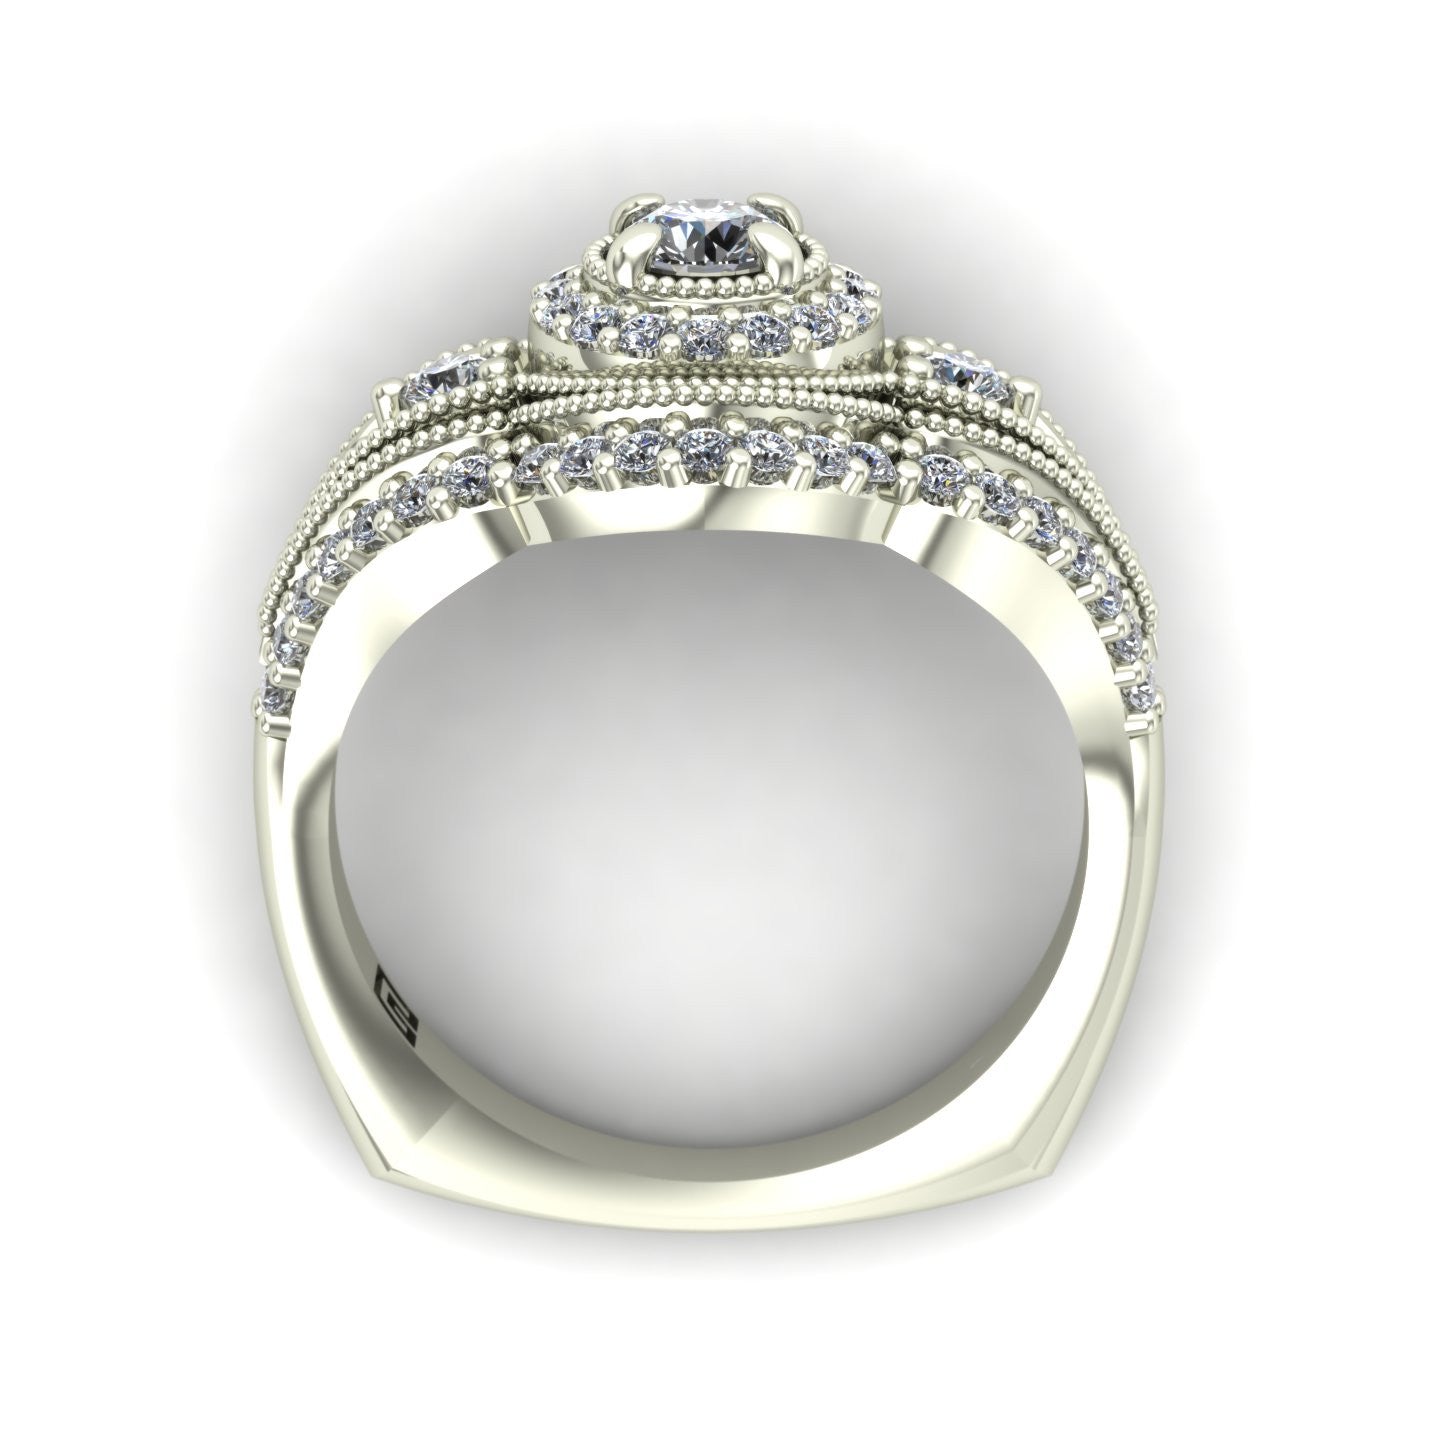 Diamond halo engagement ring with diamond border in 14k white gold - Charles Babb Designs - through finger view